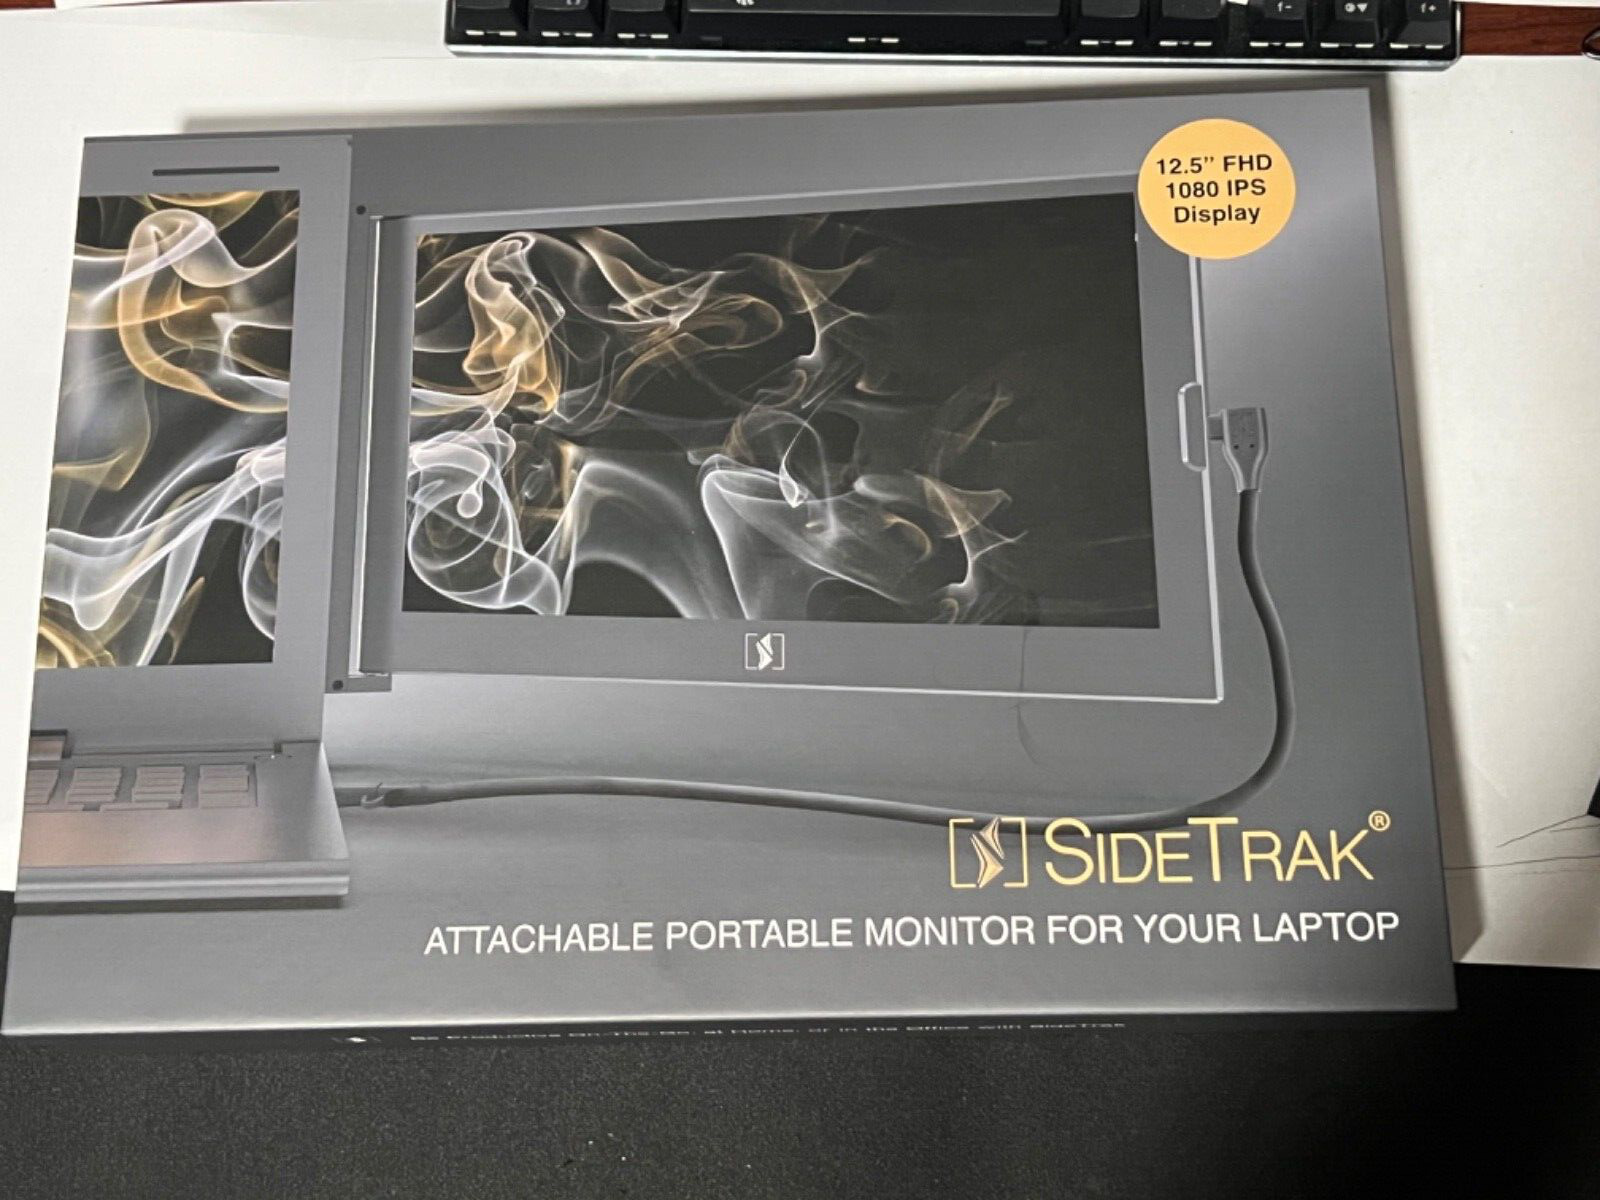 NEW SideTrak 12.5” Full HD attachable portable monitor for laptop